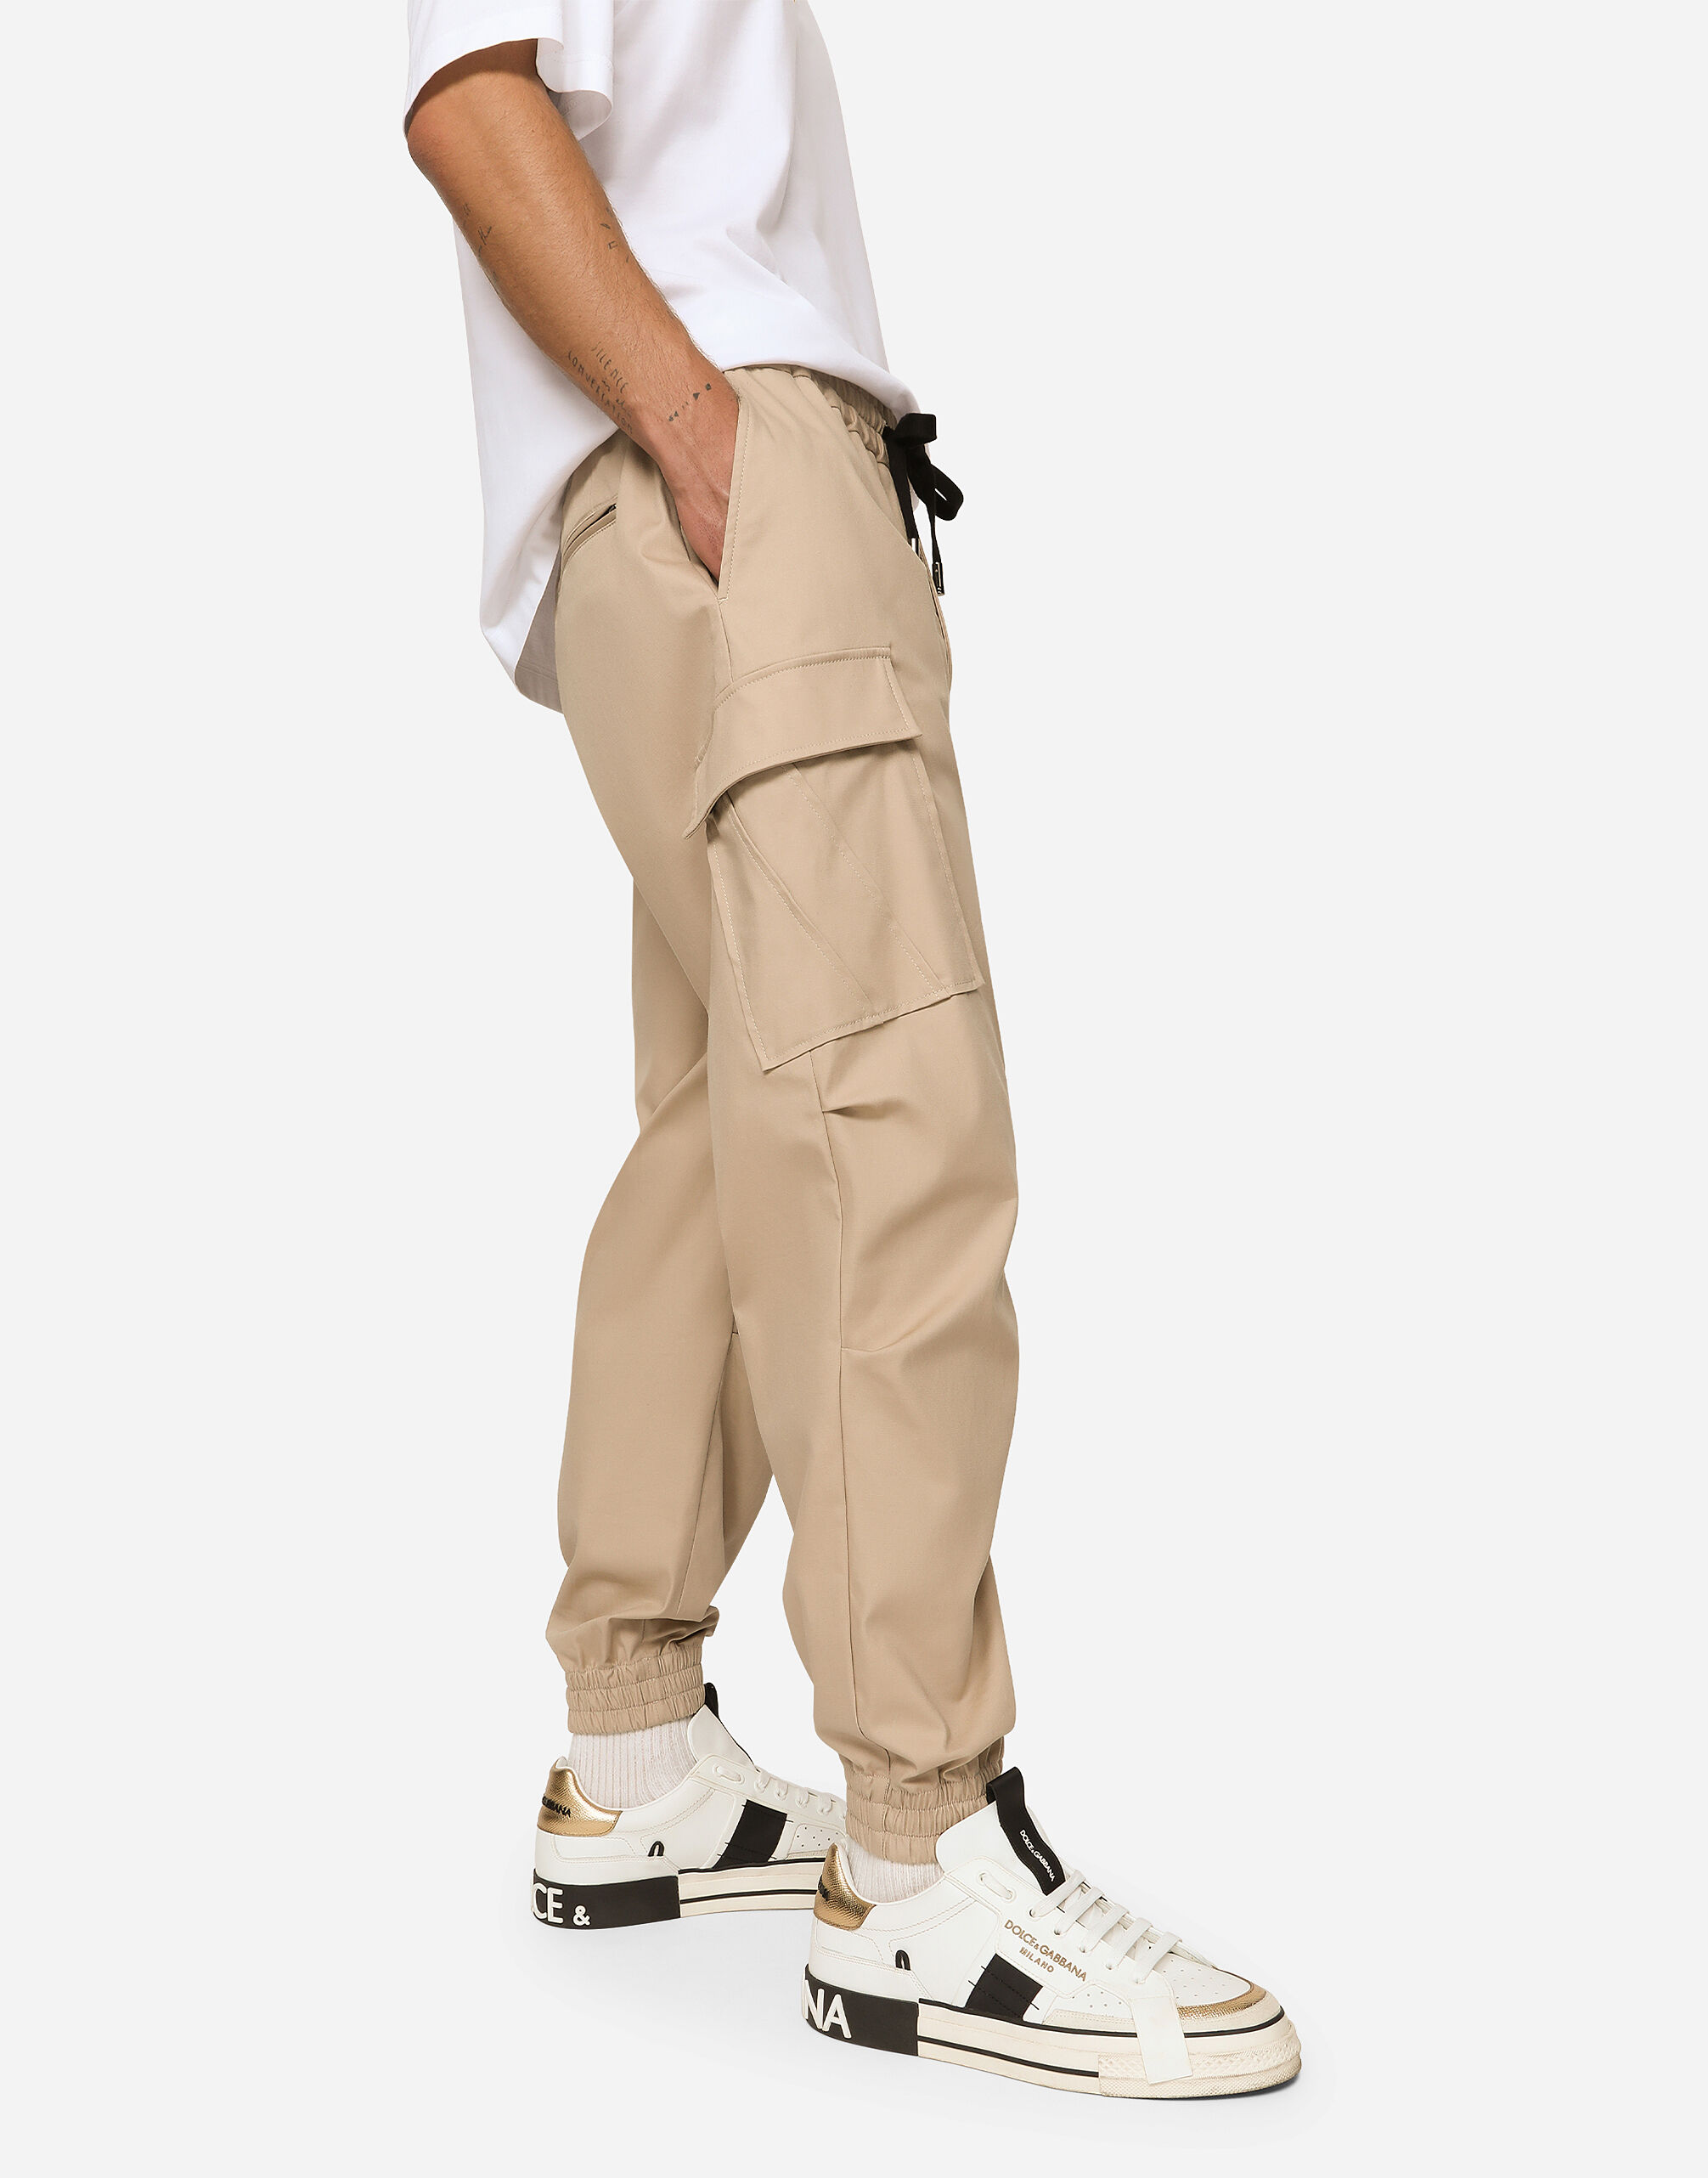 Multicolor Branded cargo track pants/lowers for men's at Rs 225/piece in  New Delhi